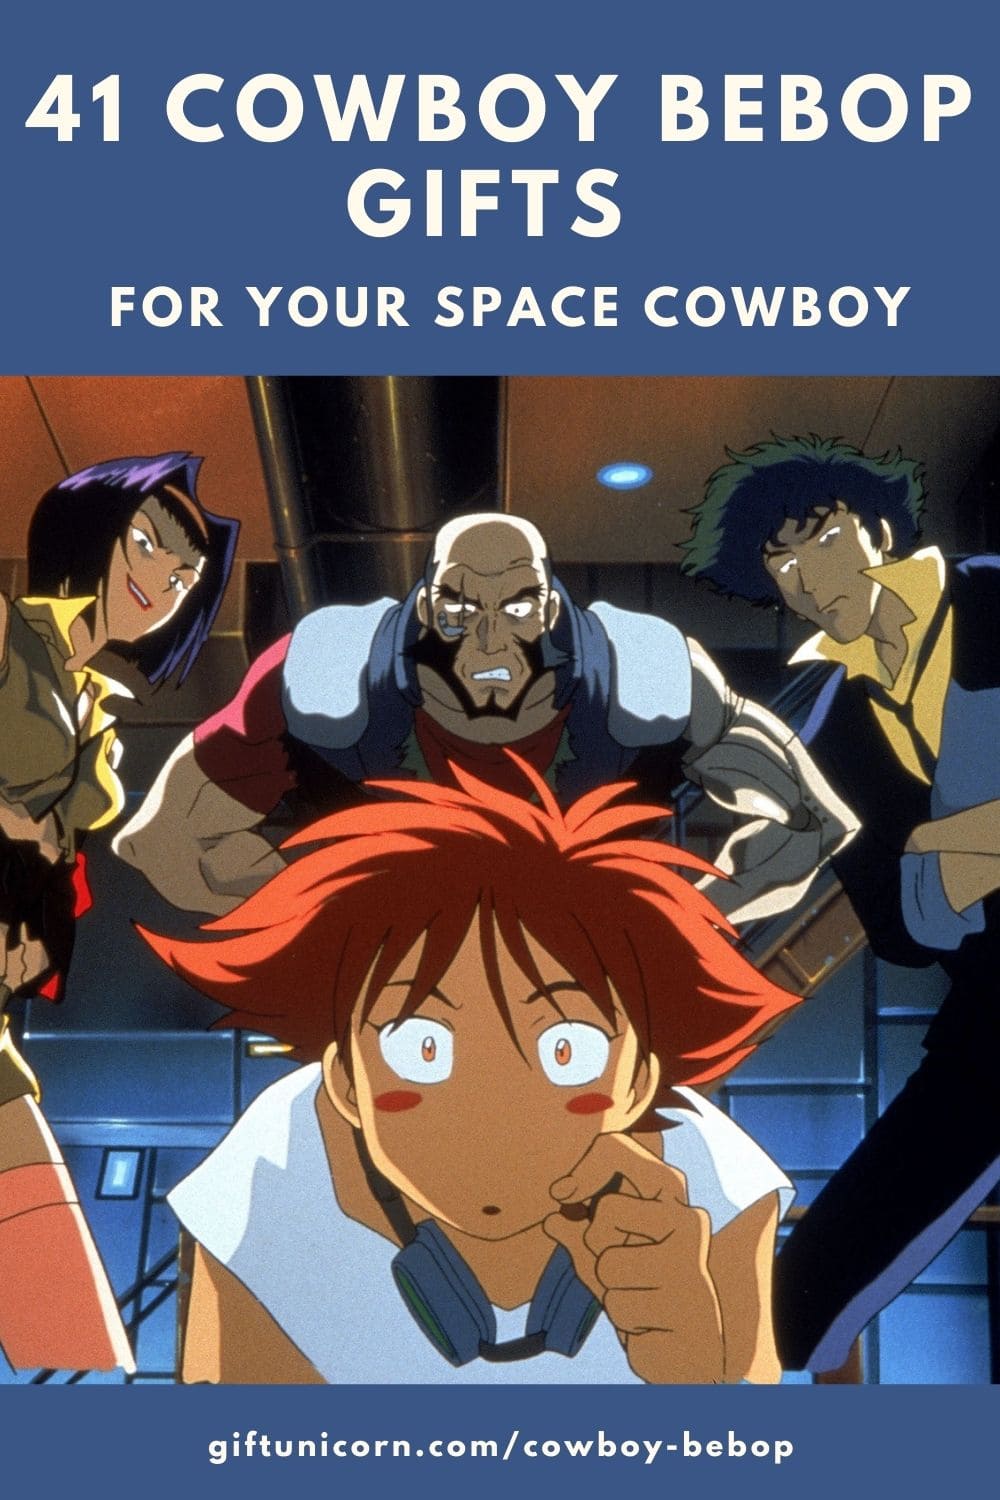 41 Cowboy Bebop Gifts for Your Space Cowboy - pinterest pin image